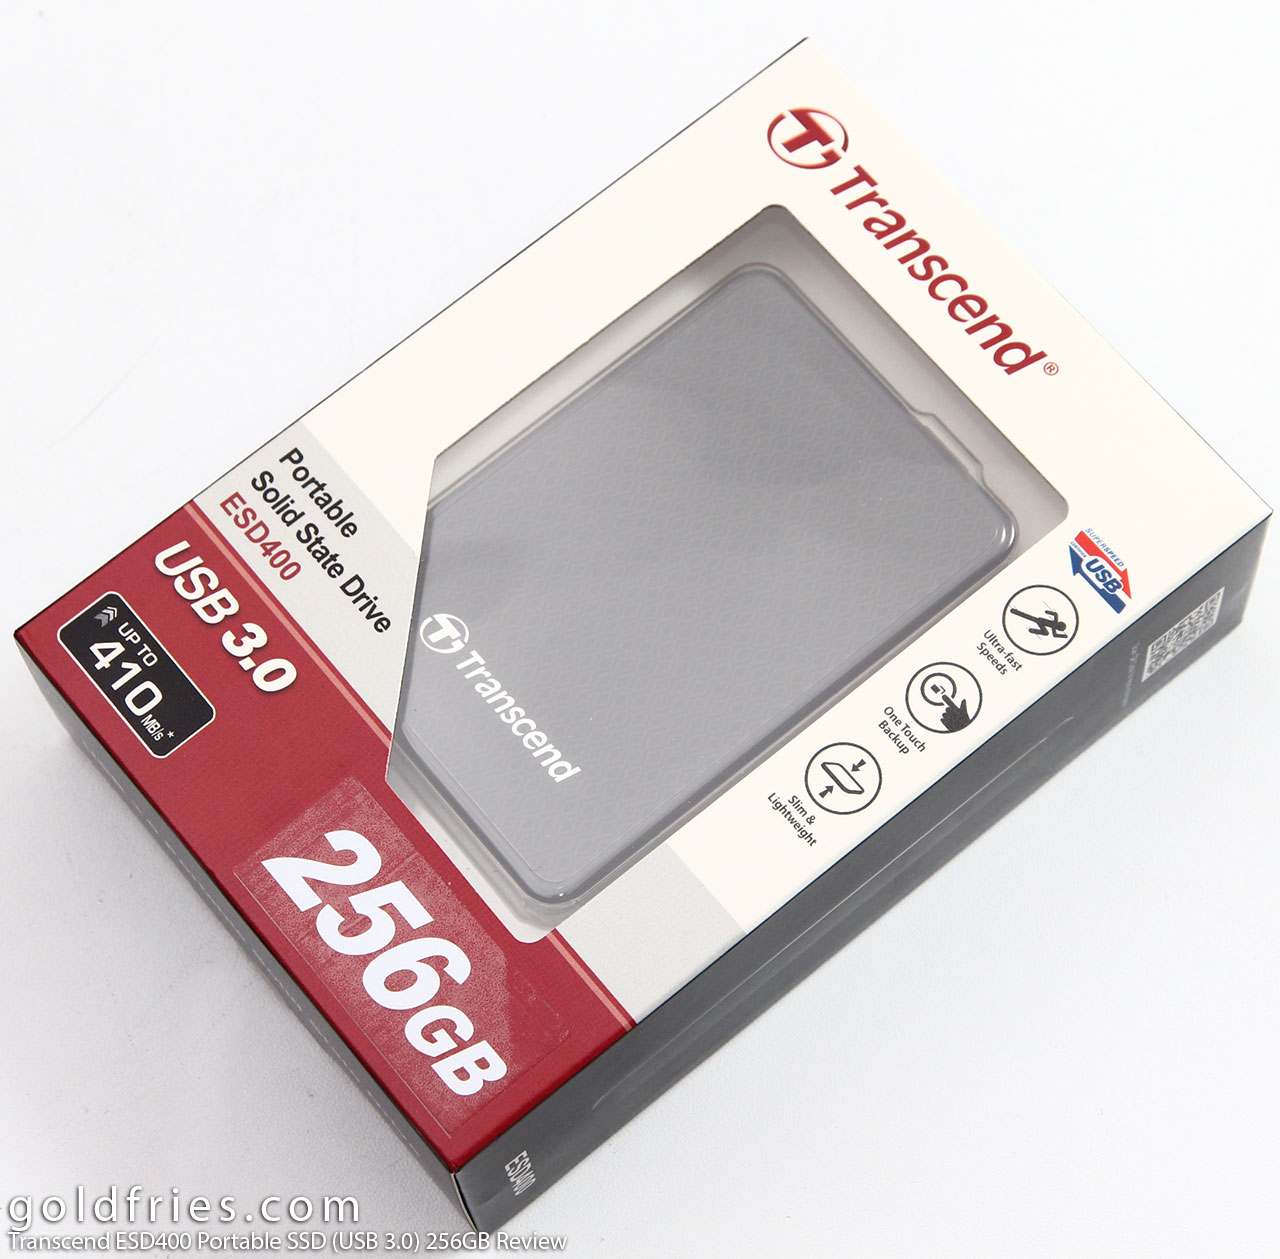 Transcend ESD400 Portable SSD (USB 3.0) 256GB Review